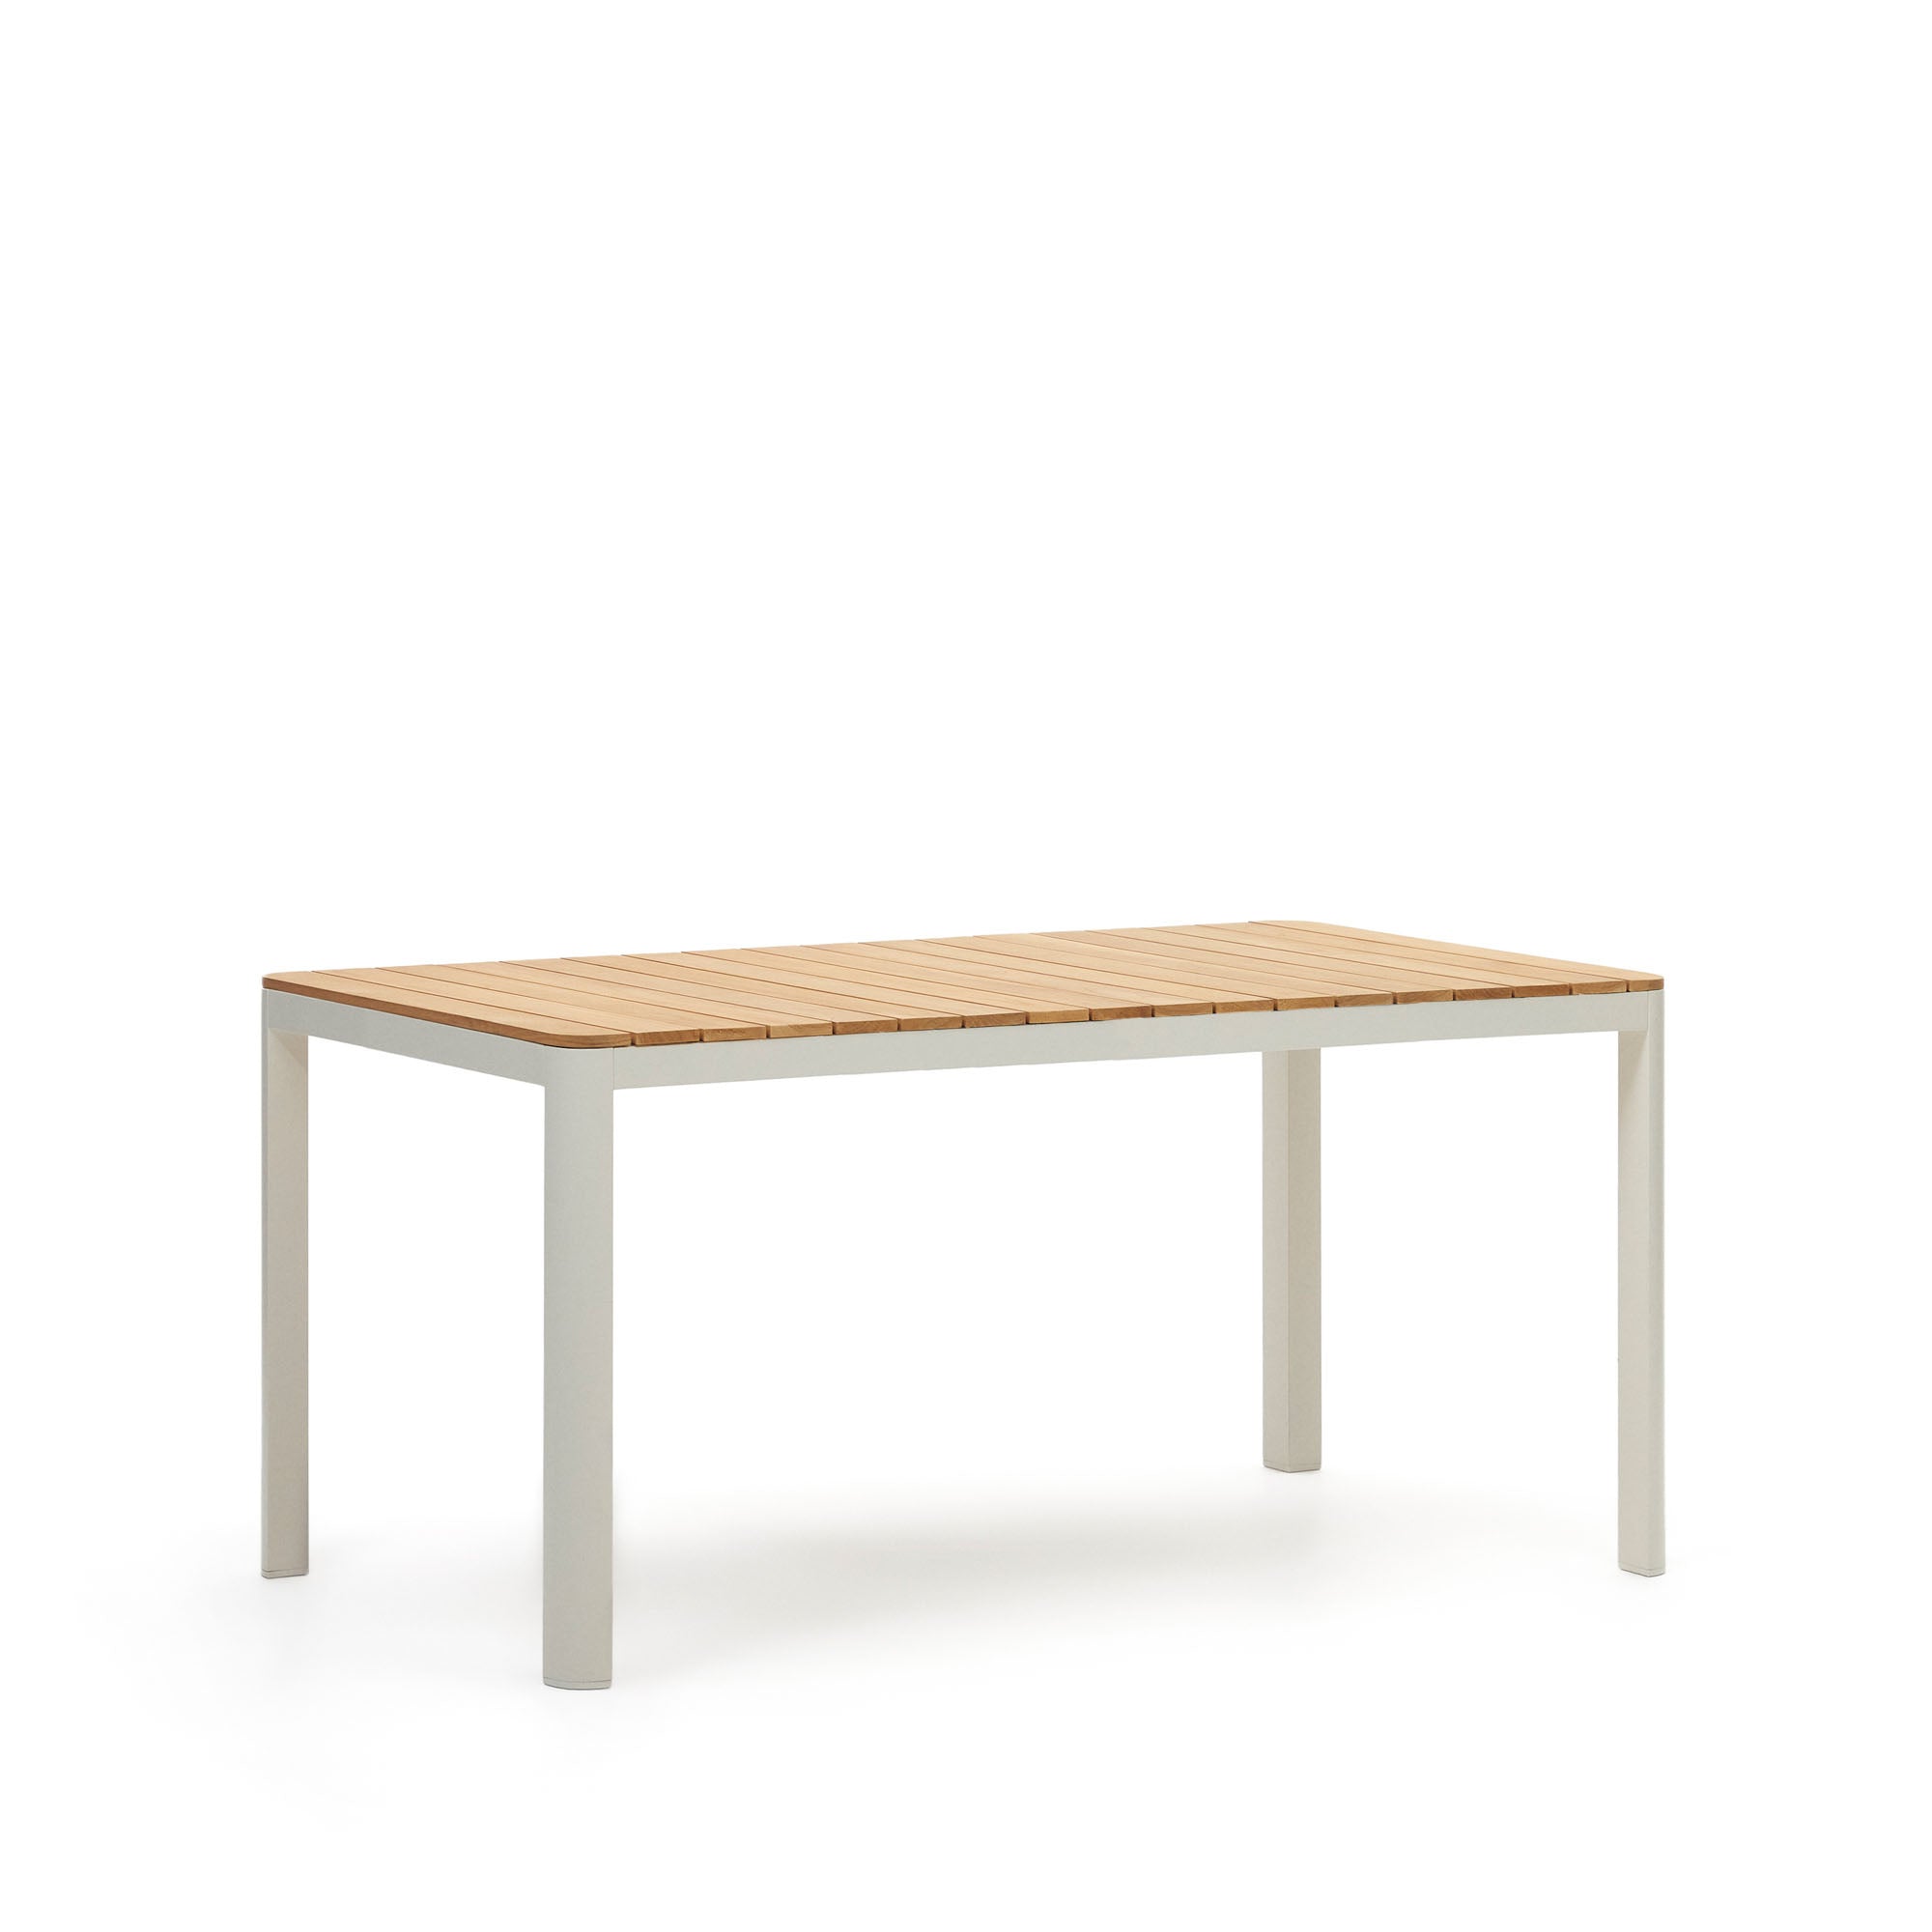 Bona aluminium and solid teak table, 100% outdoor suitable with white finish, 160 x 90 cm